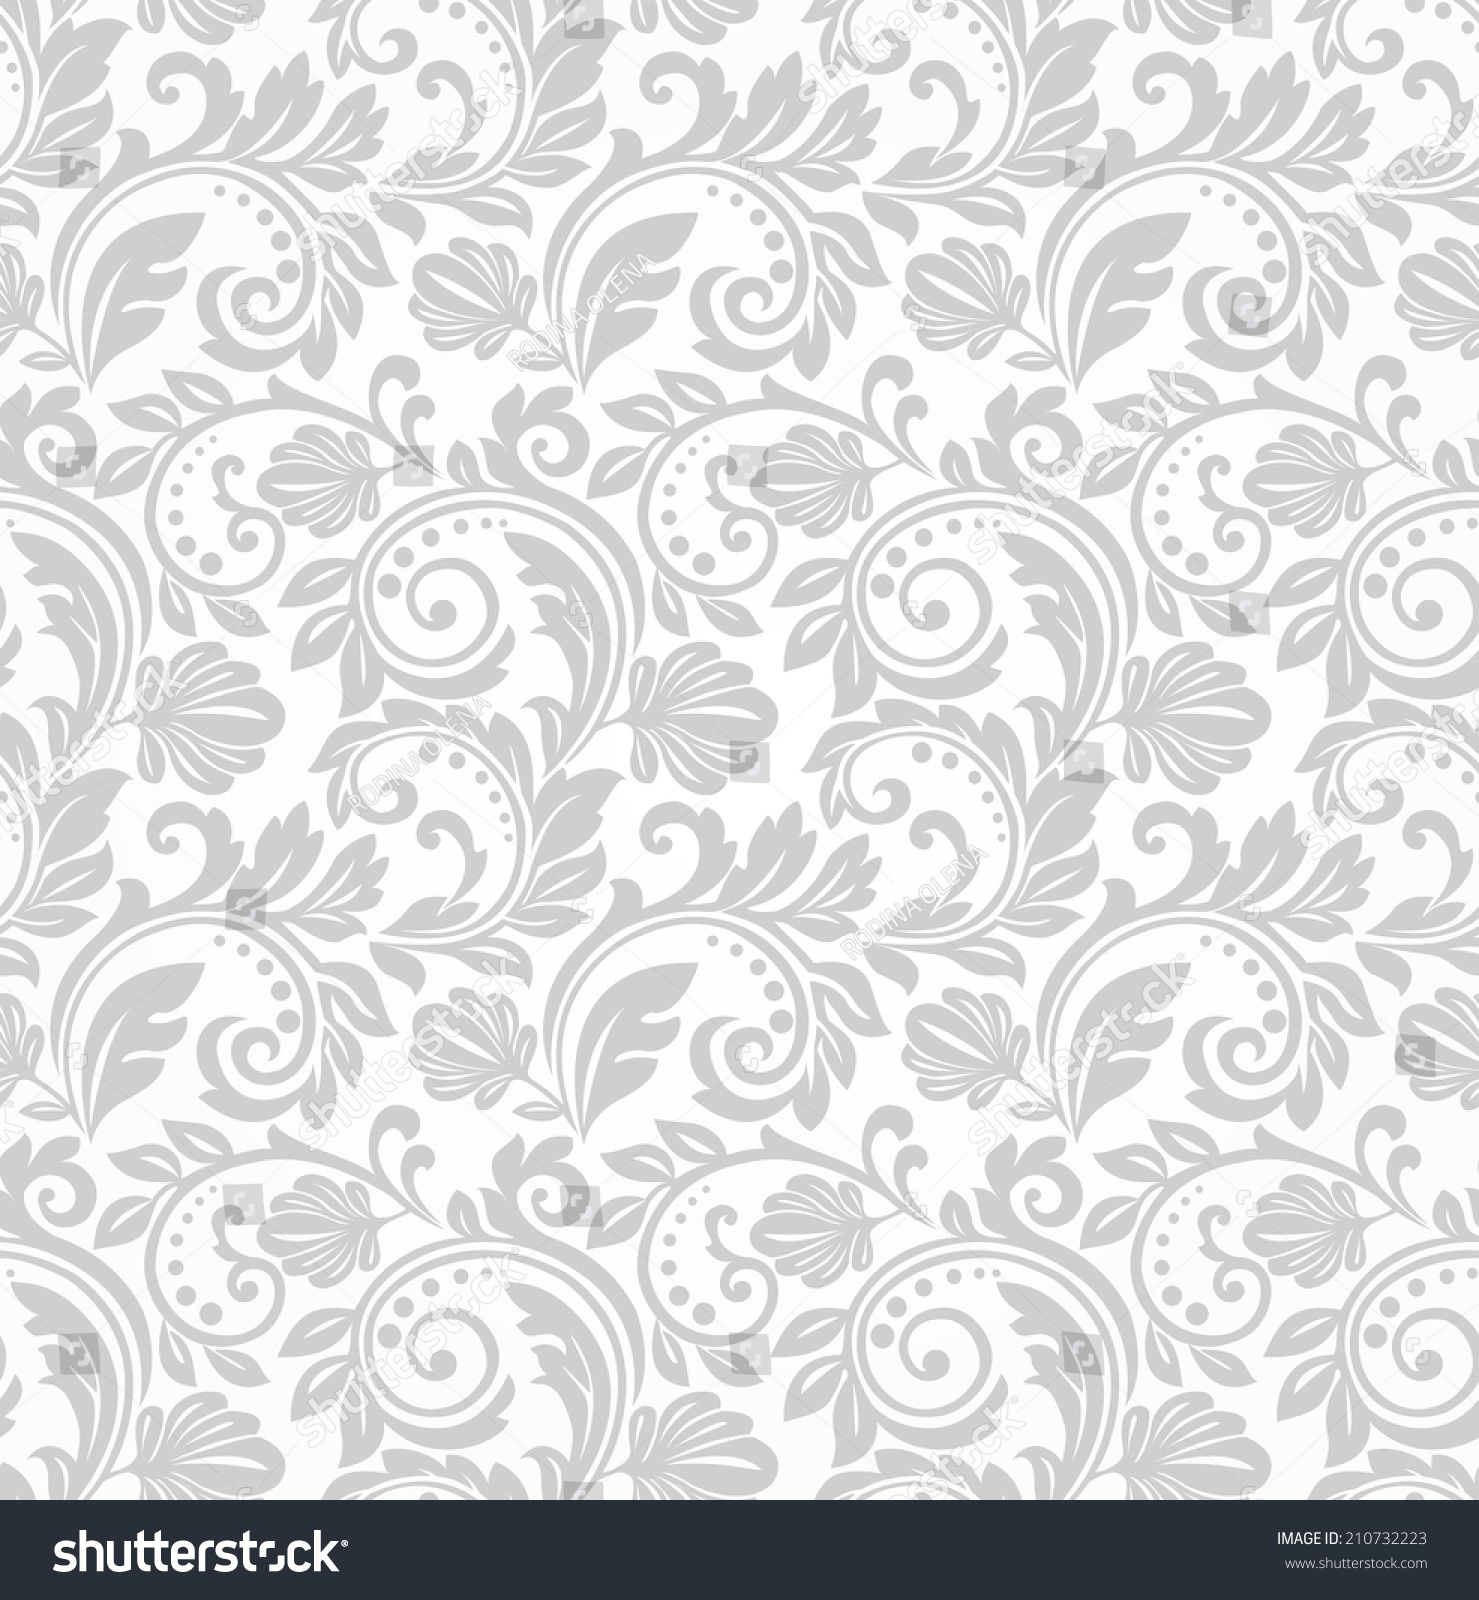 Floral Pattern. Wallpaper Baroque, Damask. Seamless Background. Gray ...